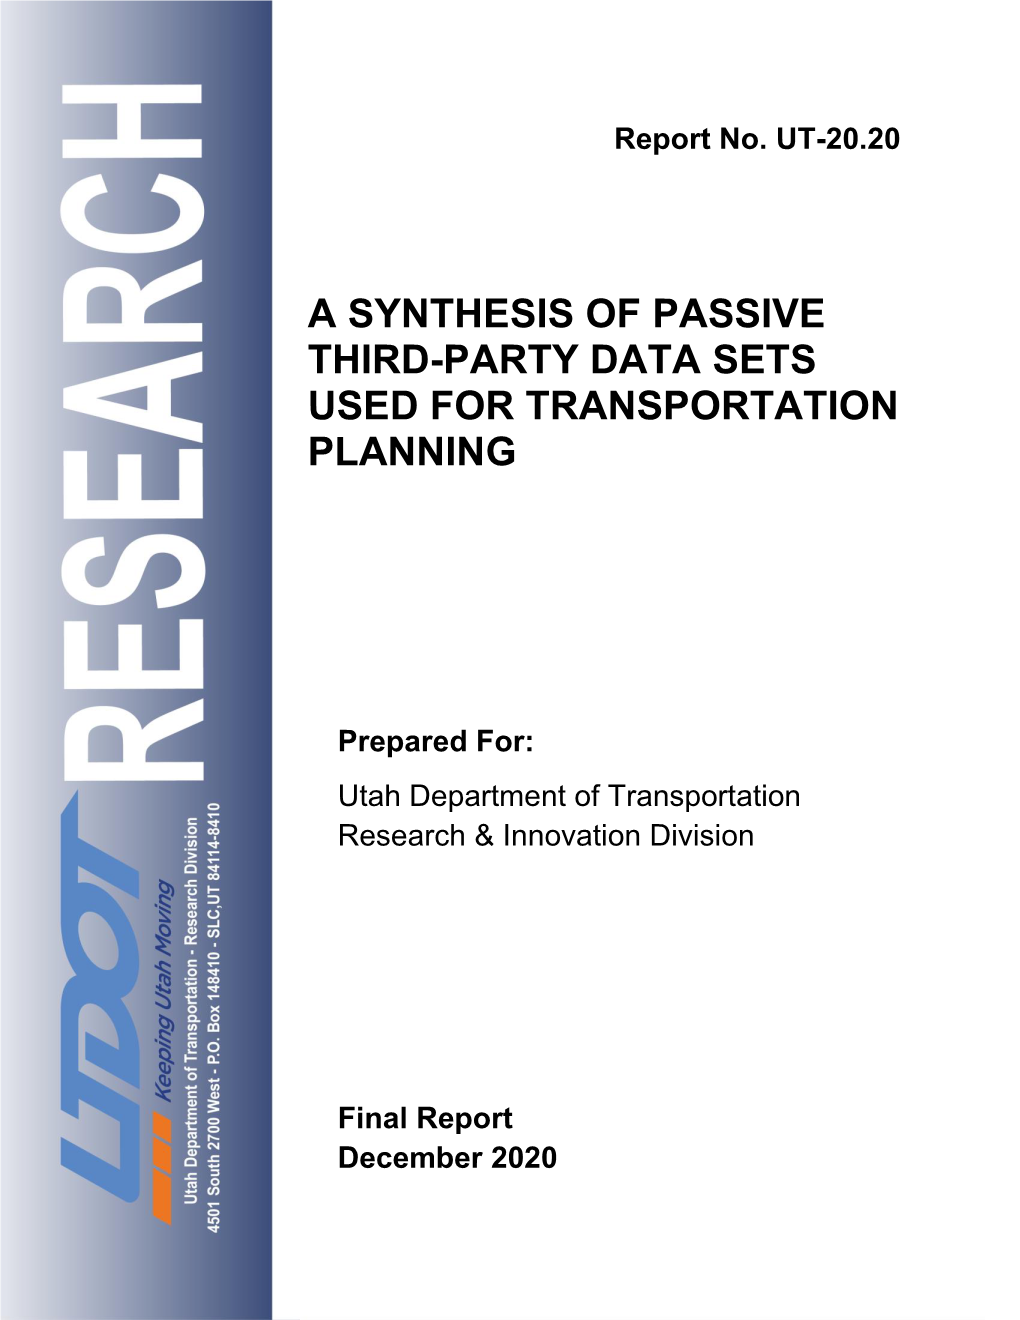 A Synthesis of Passive Third-Party Data Sets Used for Transportation Planning